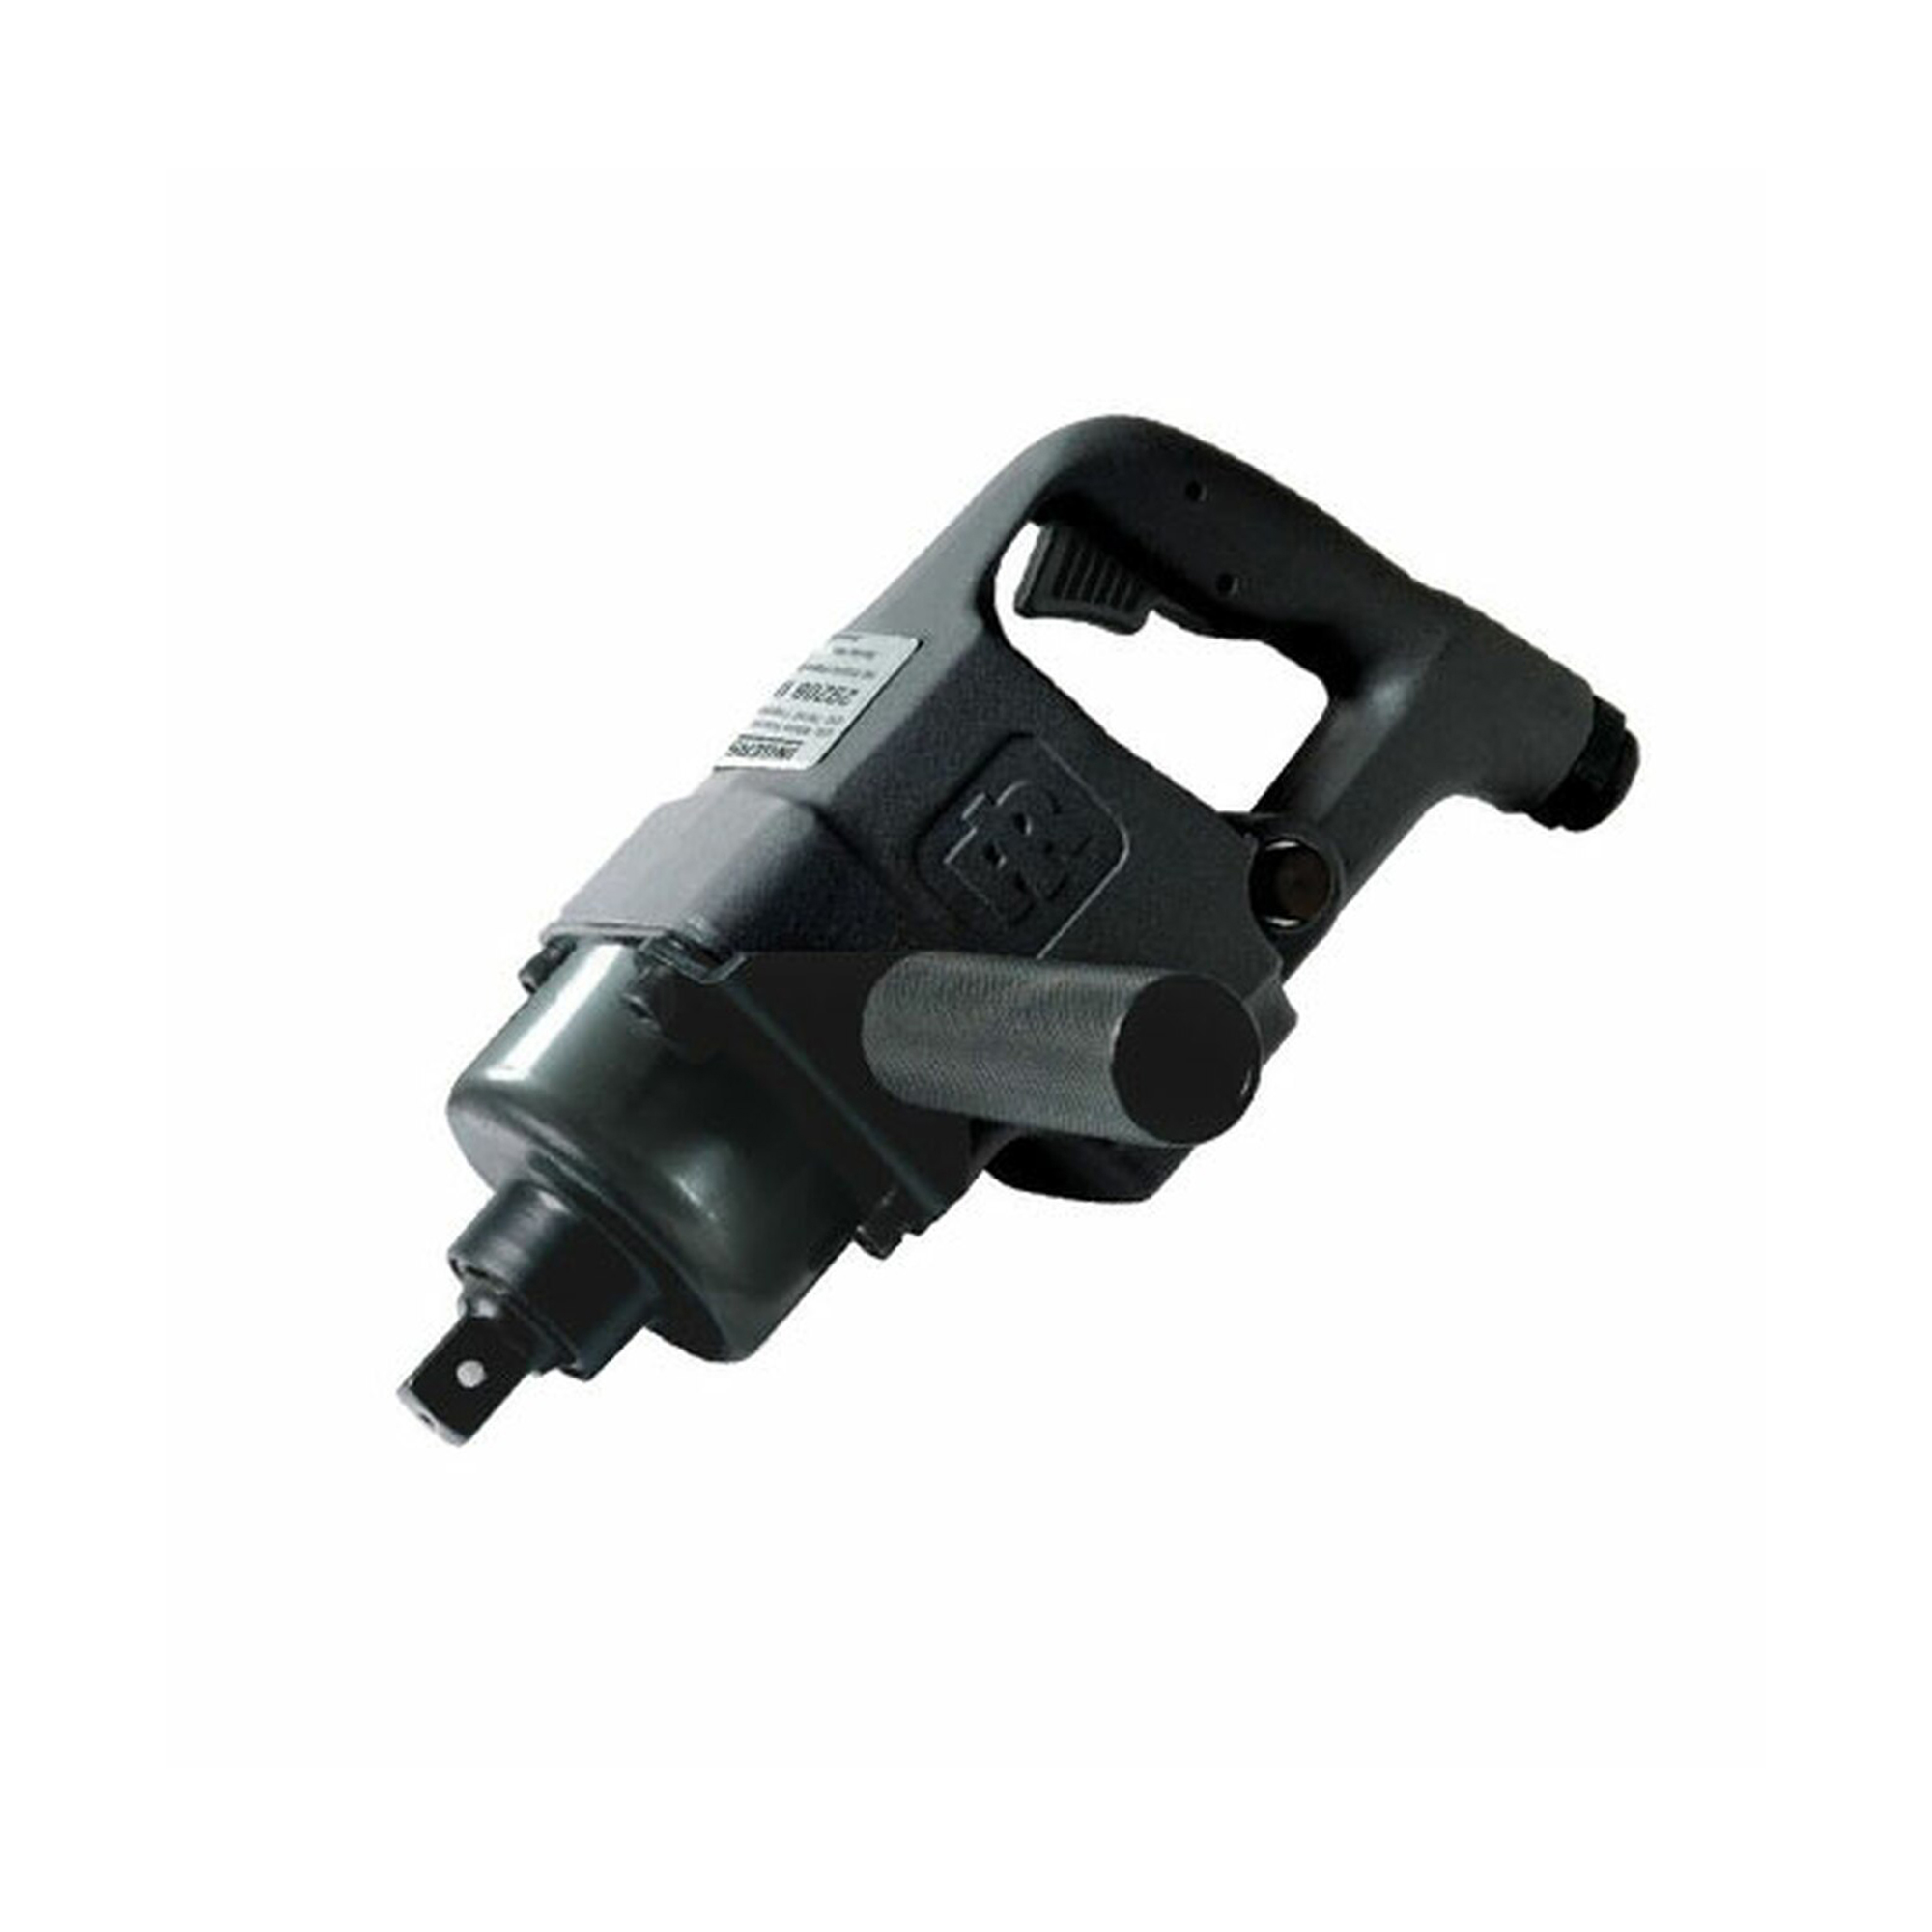 Impact wrench  Ingersollrand 3/4 Drive  Super DUTY